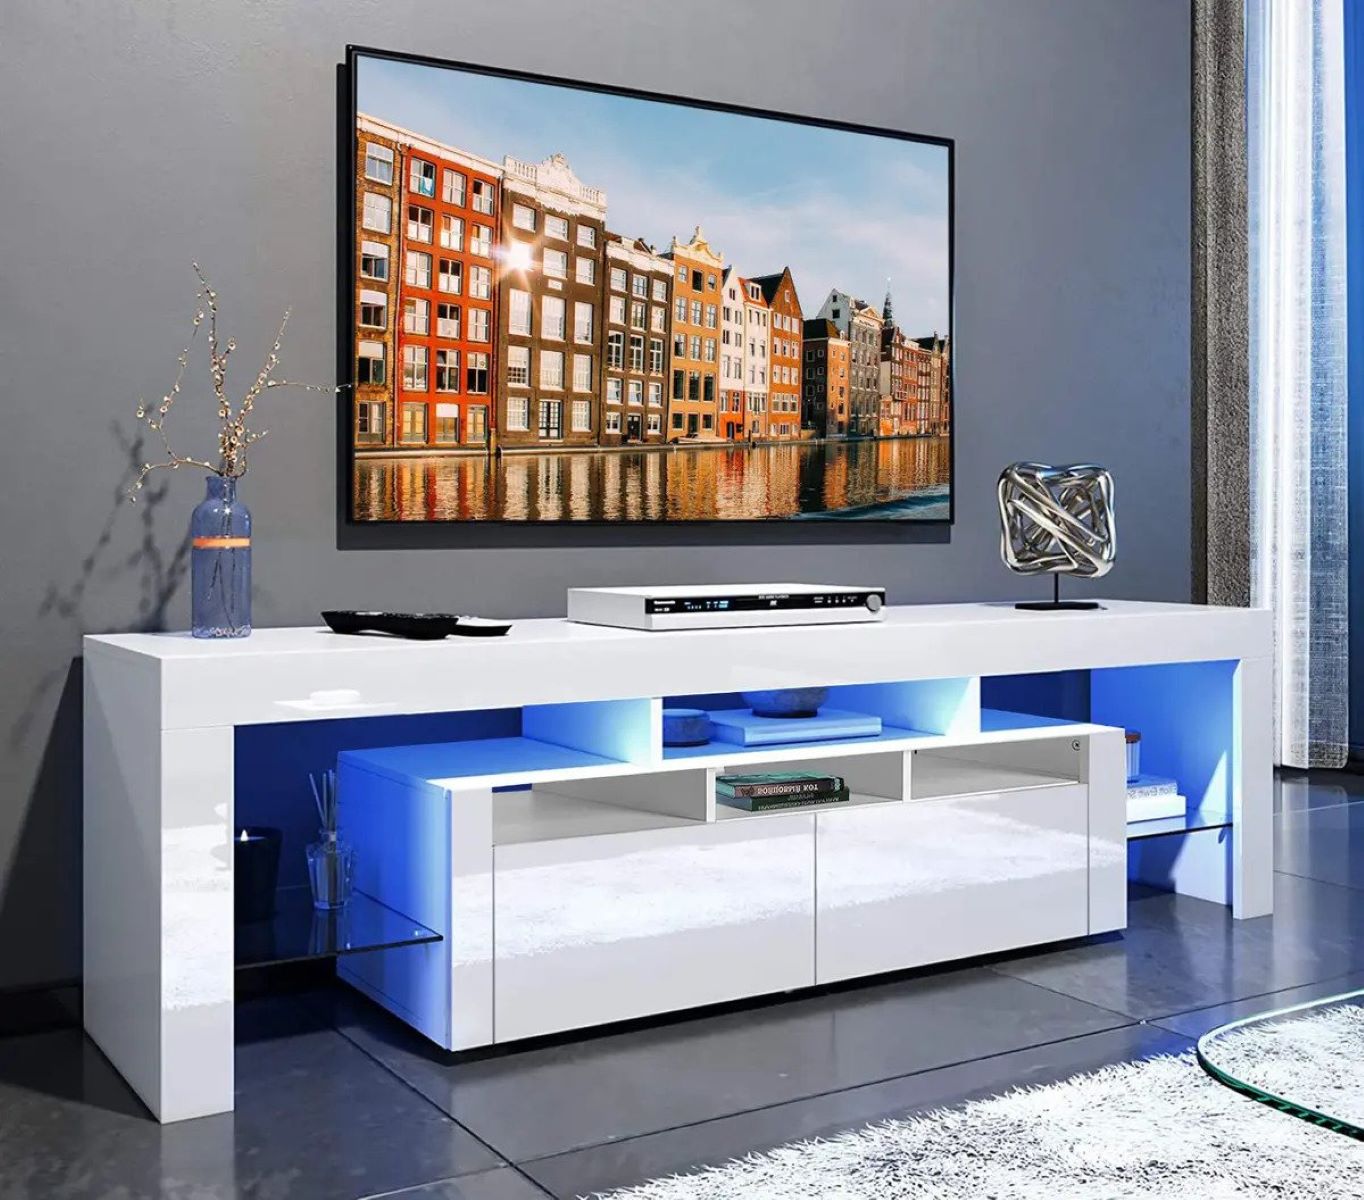 How To Install Led Lights On Tv Stand 1702388616 